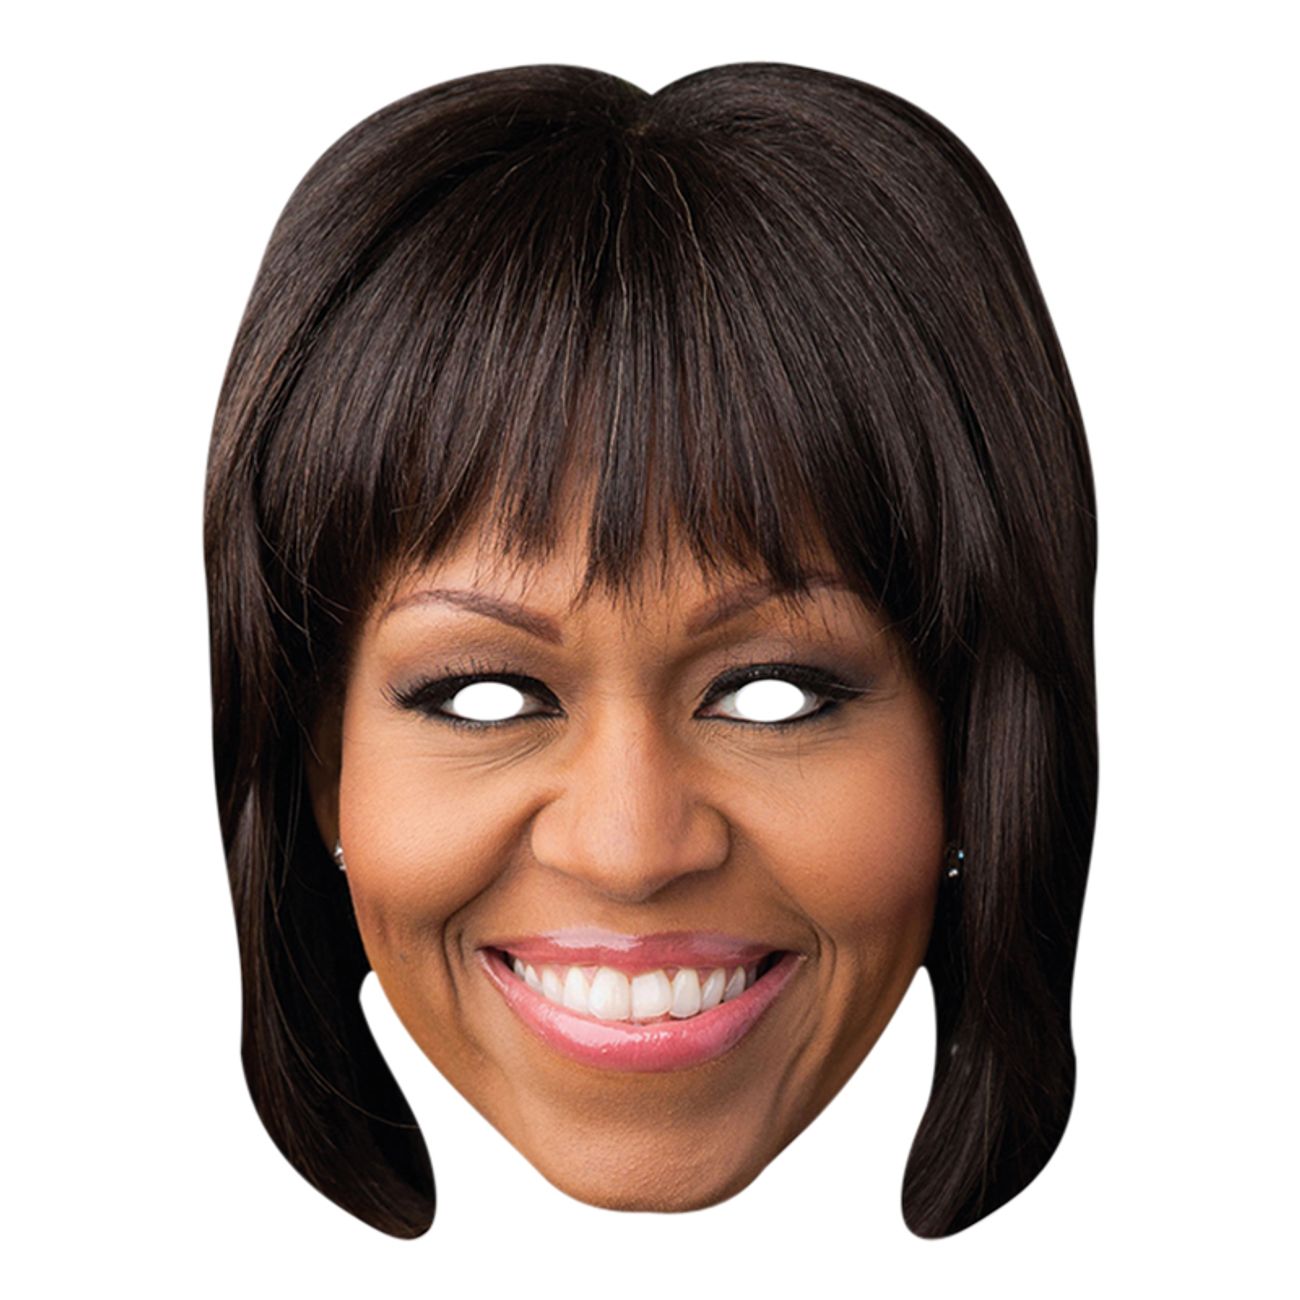 michelle-obama-pappmask-2